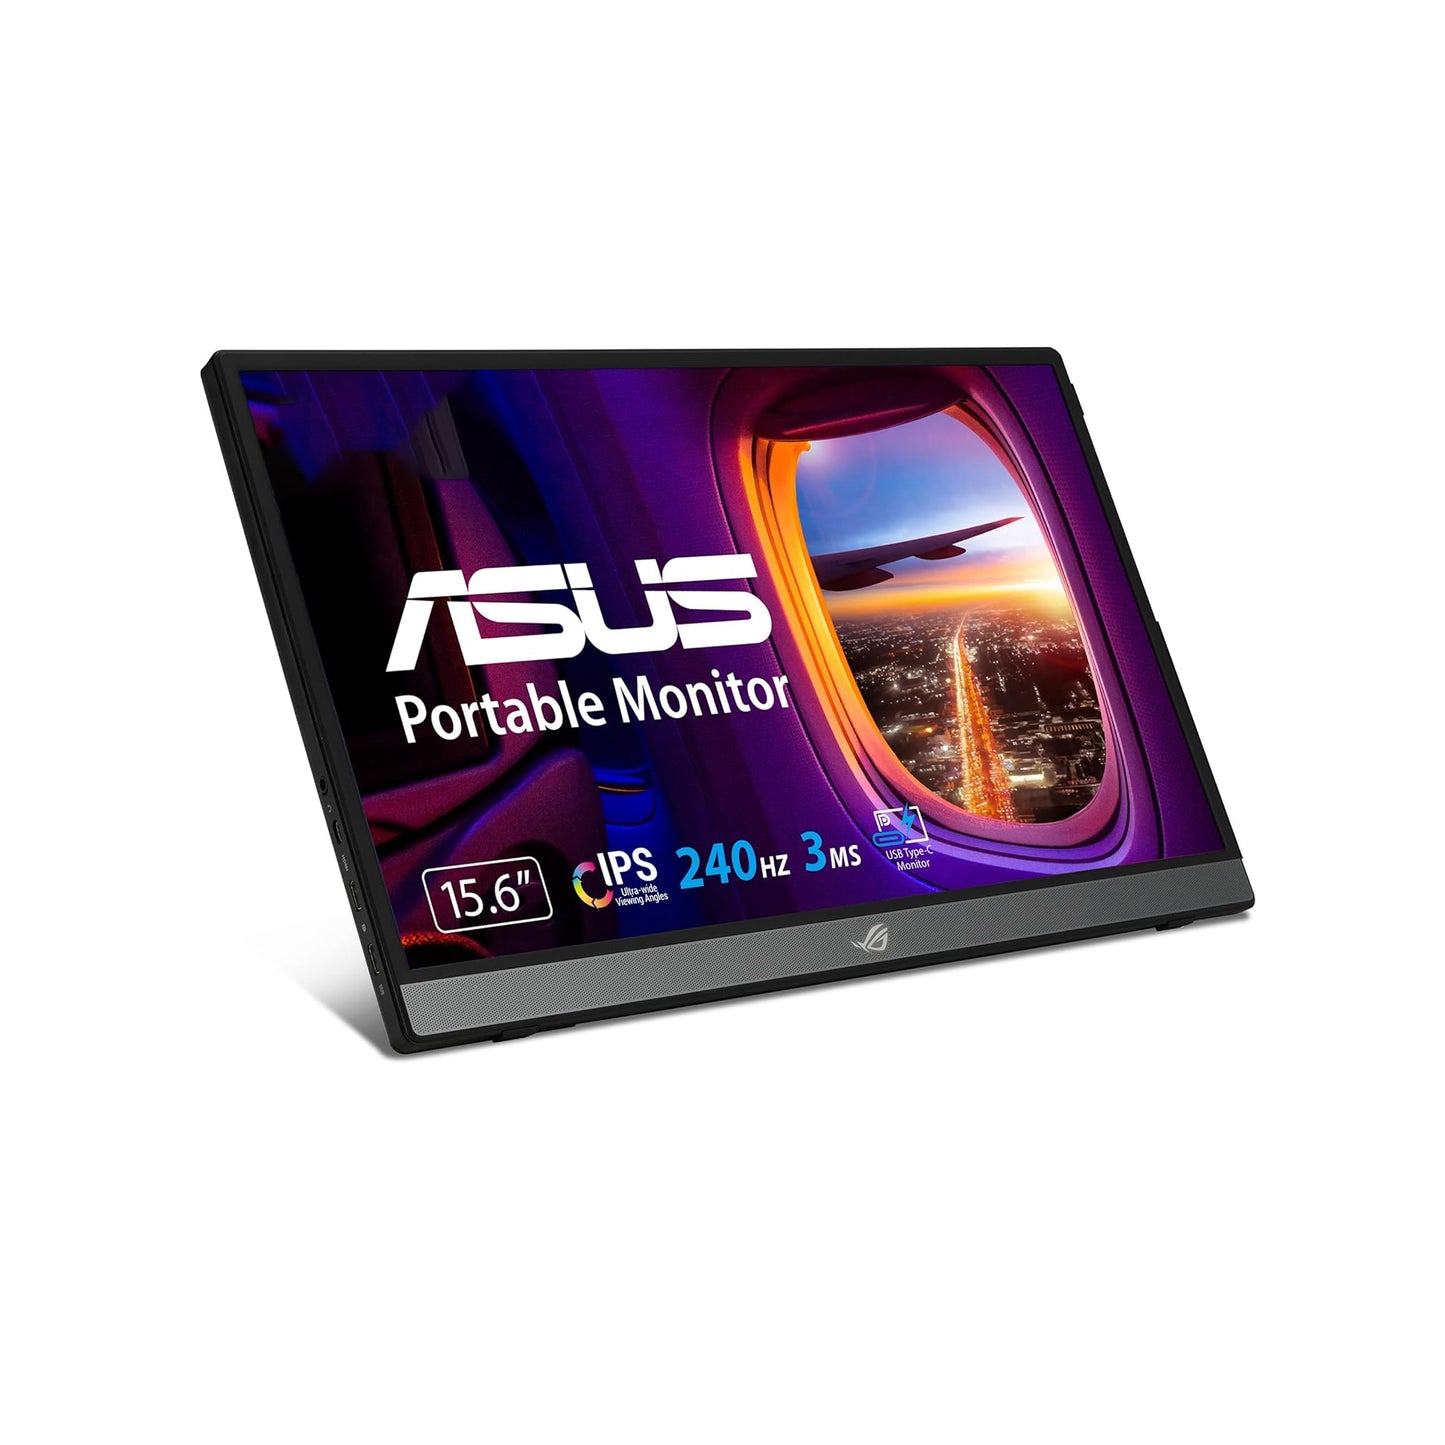 ASUS ROG Strix 15.6" FHD 1080P Portable Gaming Monitor XG16AHPE, 144Hz, IPS, G-SYNC Compatible, Built-in Battery, Kickstand, USB-C, Micro HDMI, for Laptop, PC, Phone, Console